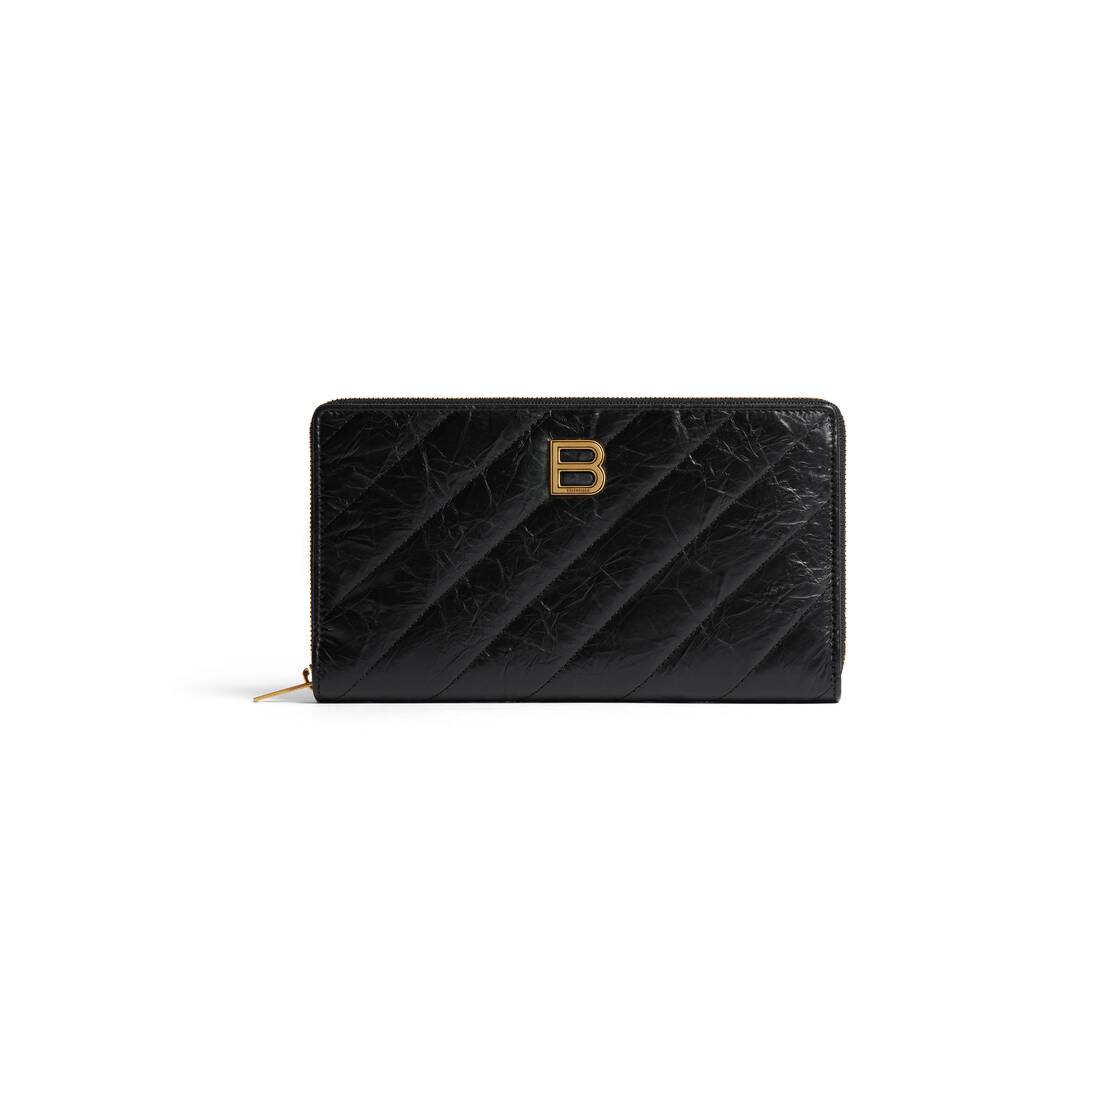 chanel quilted wallet